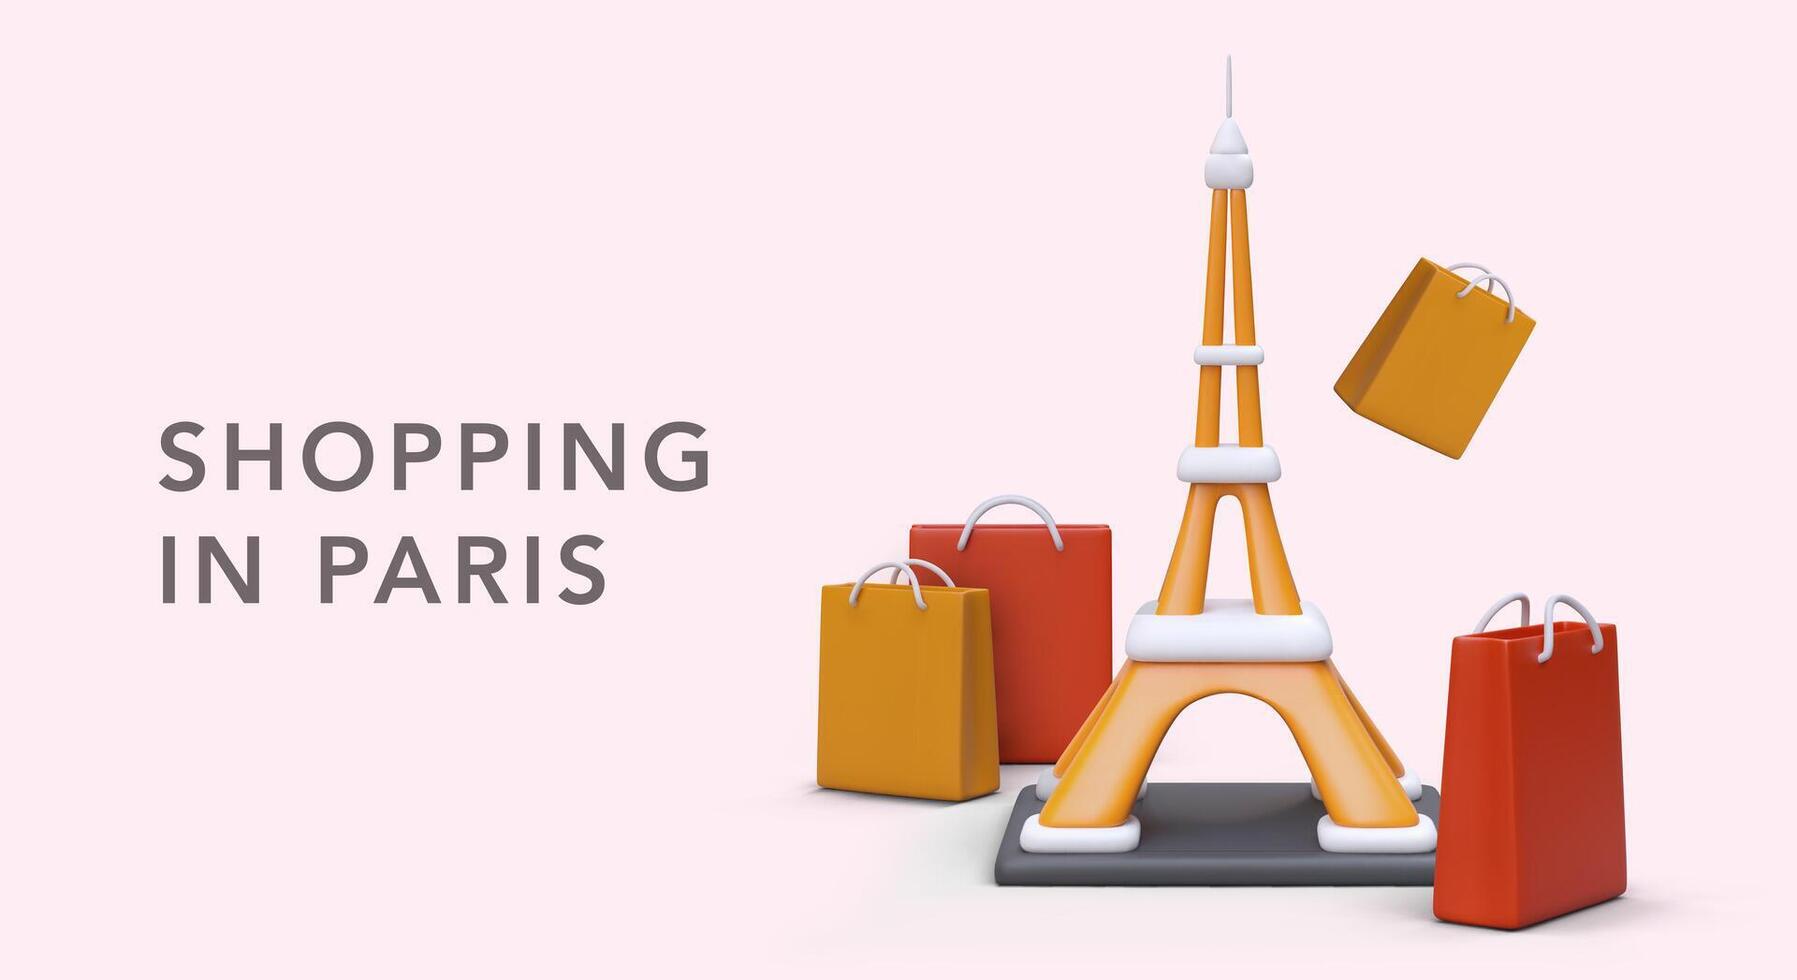 Shopping in Paris. 3D Eiffel Tower, paper bags with handles, advertising inscription vector